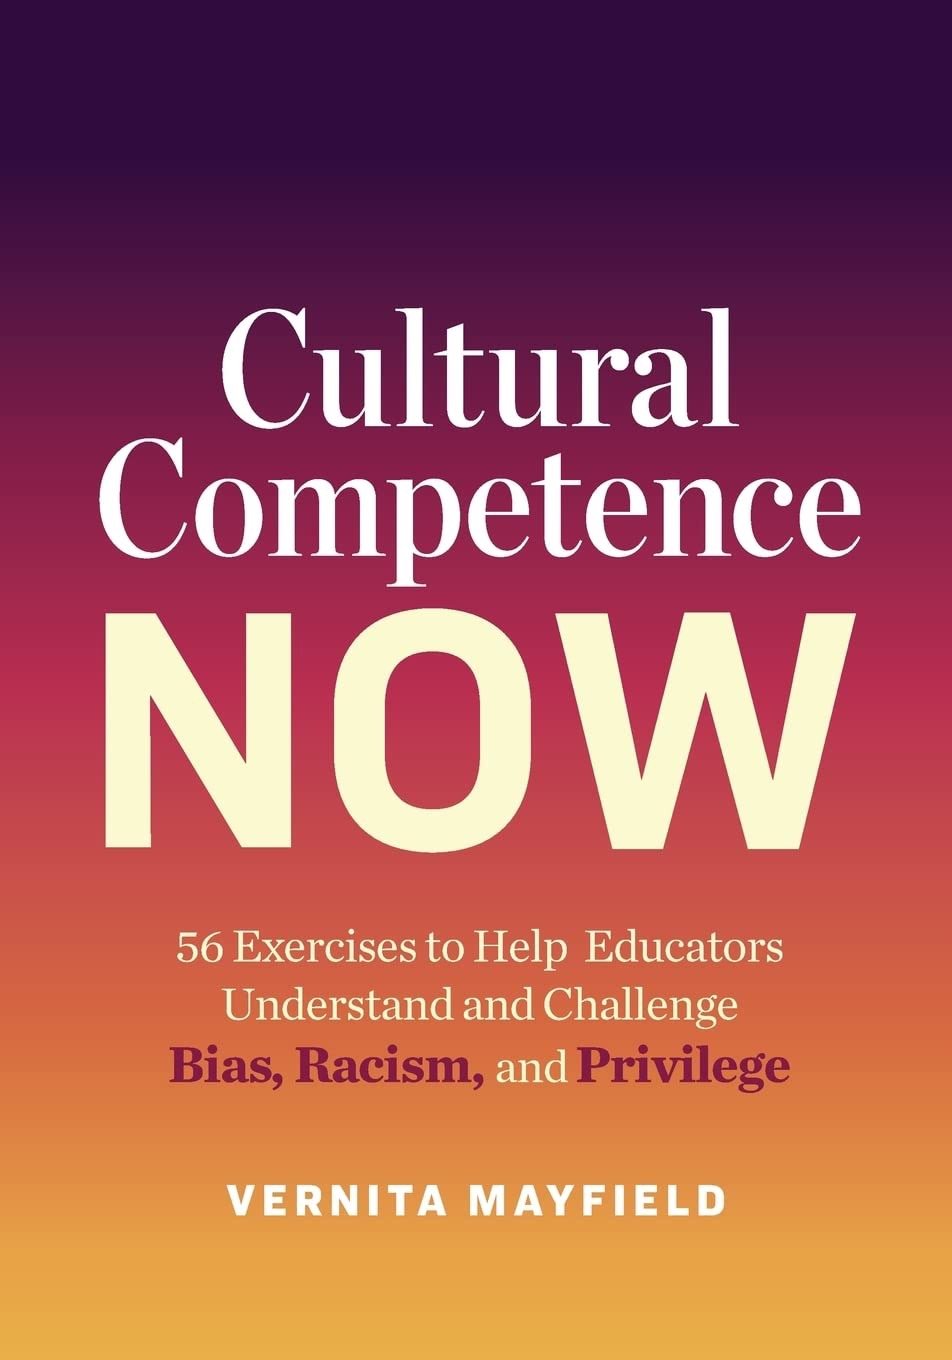 Cultural Competence Now: Promoting Equity in Education with 56 Impactful Exercises